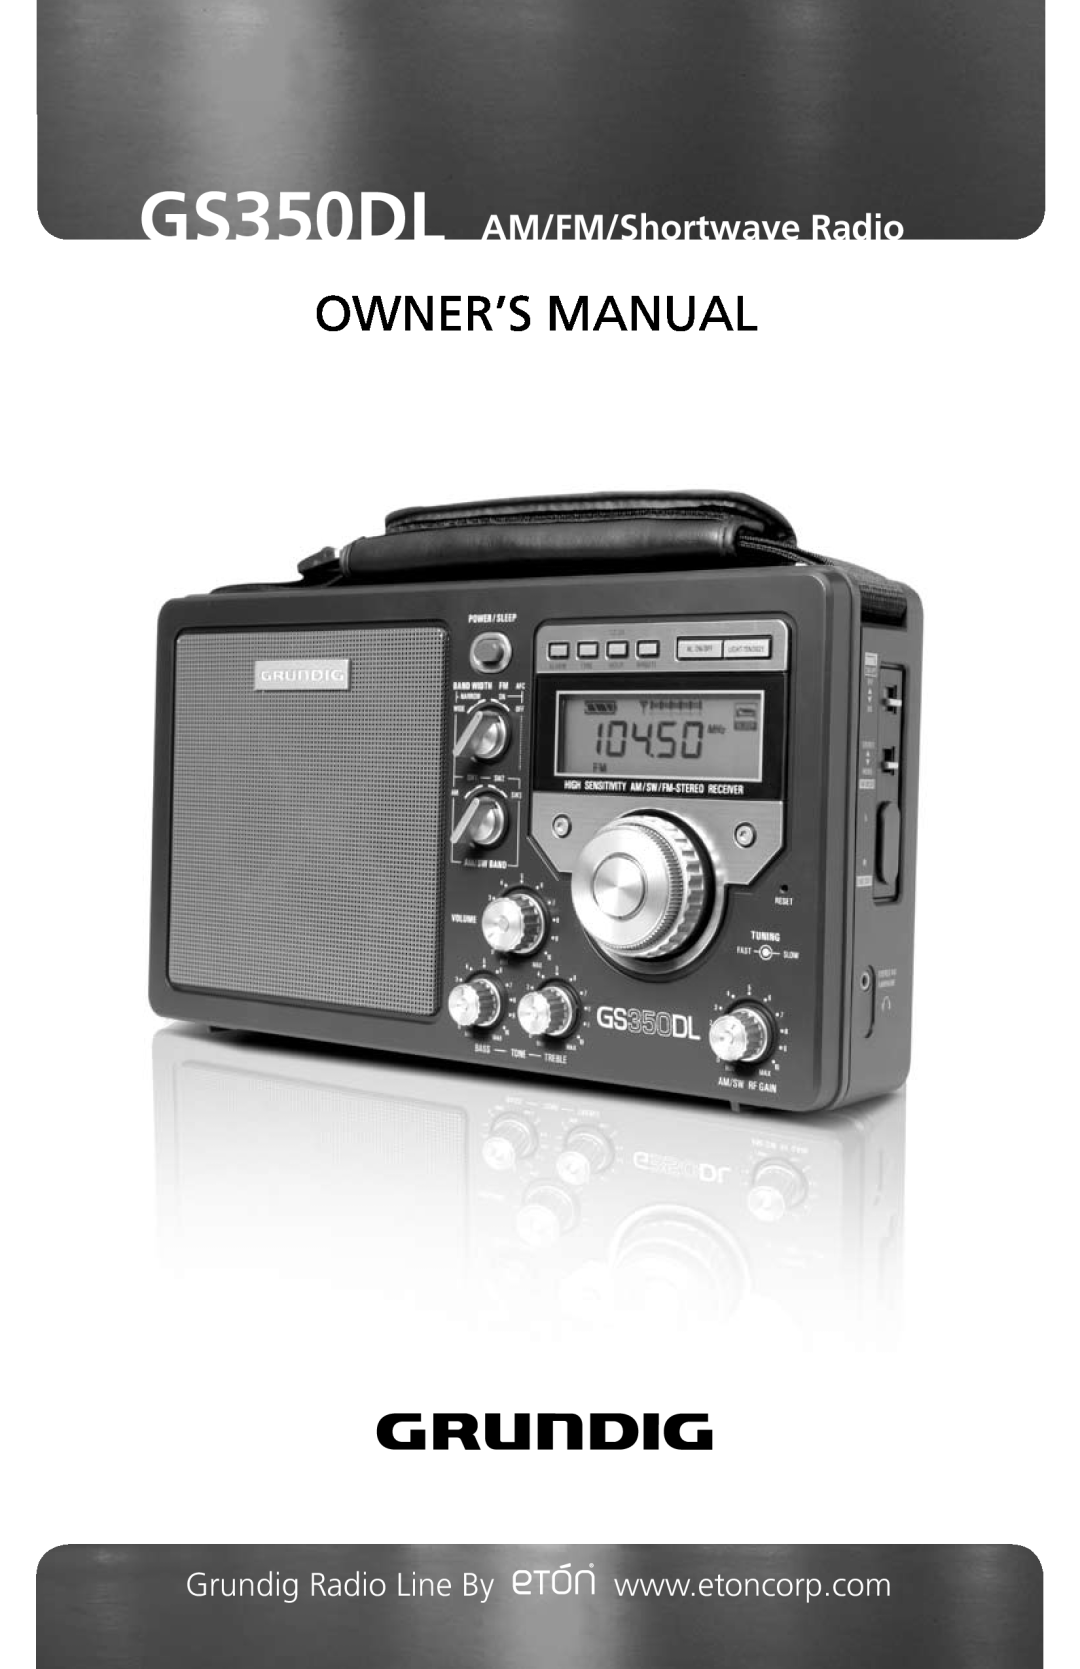 Grundig specifications Timeless Performance, GS350DL Tough Enough, Specifications, Features, AM/FM/Shortwave Radio 